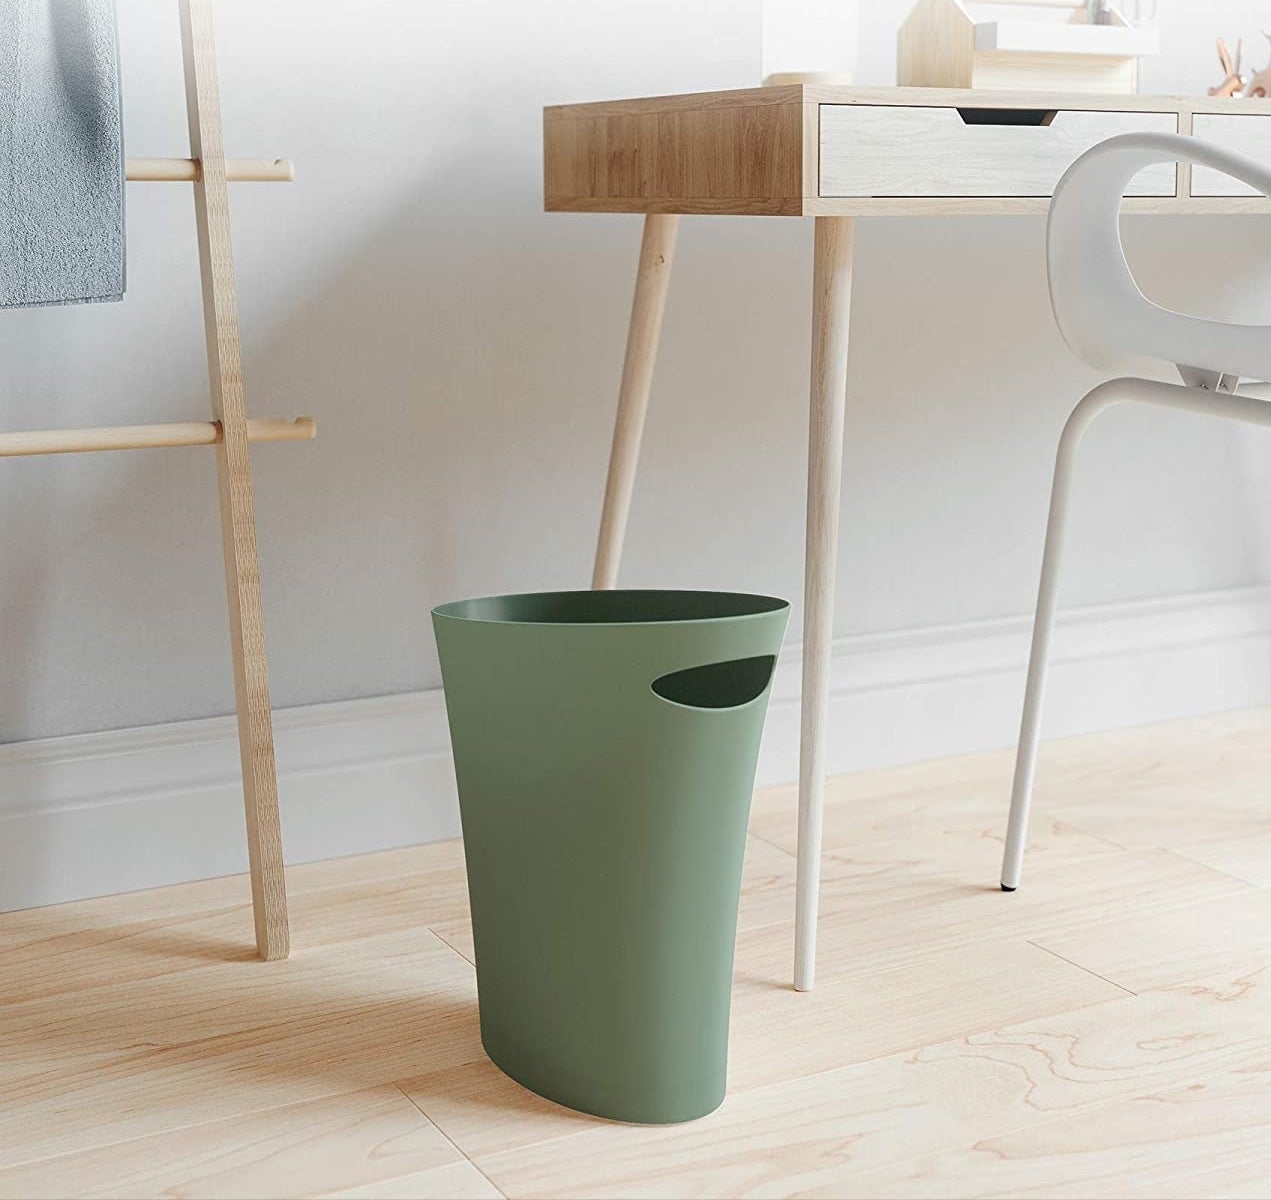  a garbage bin that is slim enough to fit in small spaces